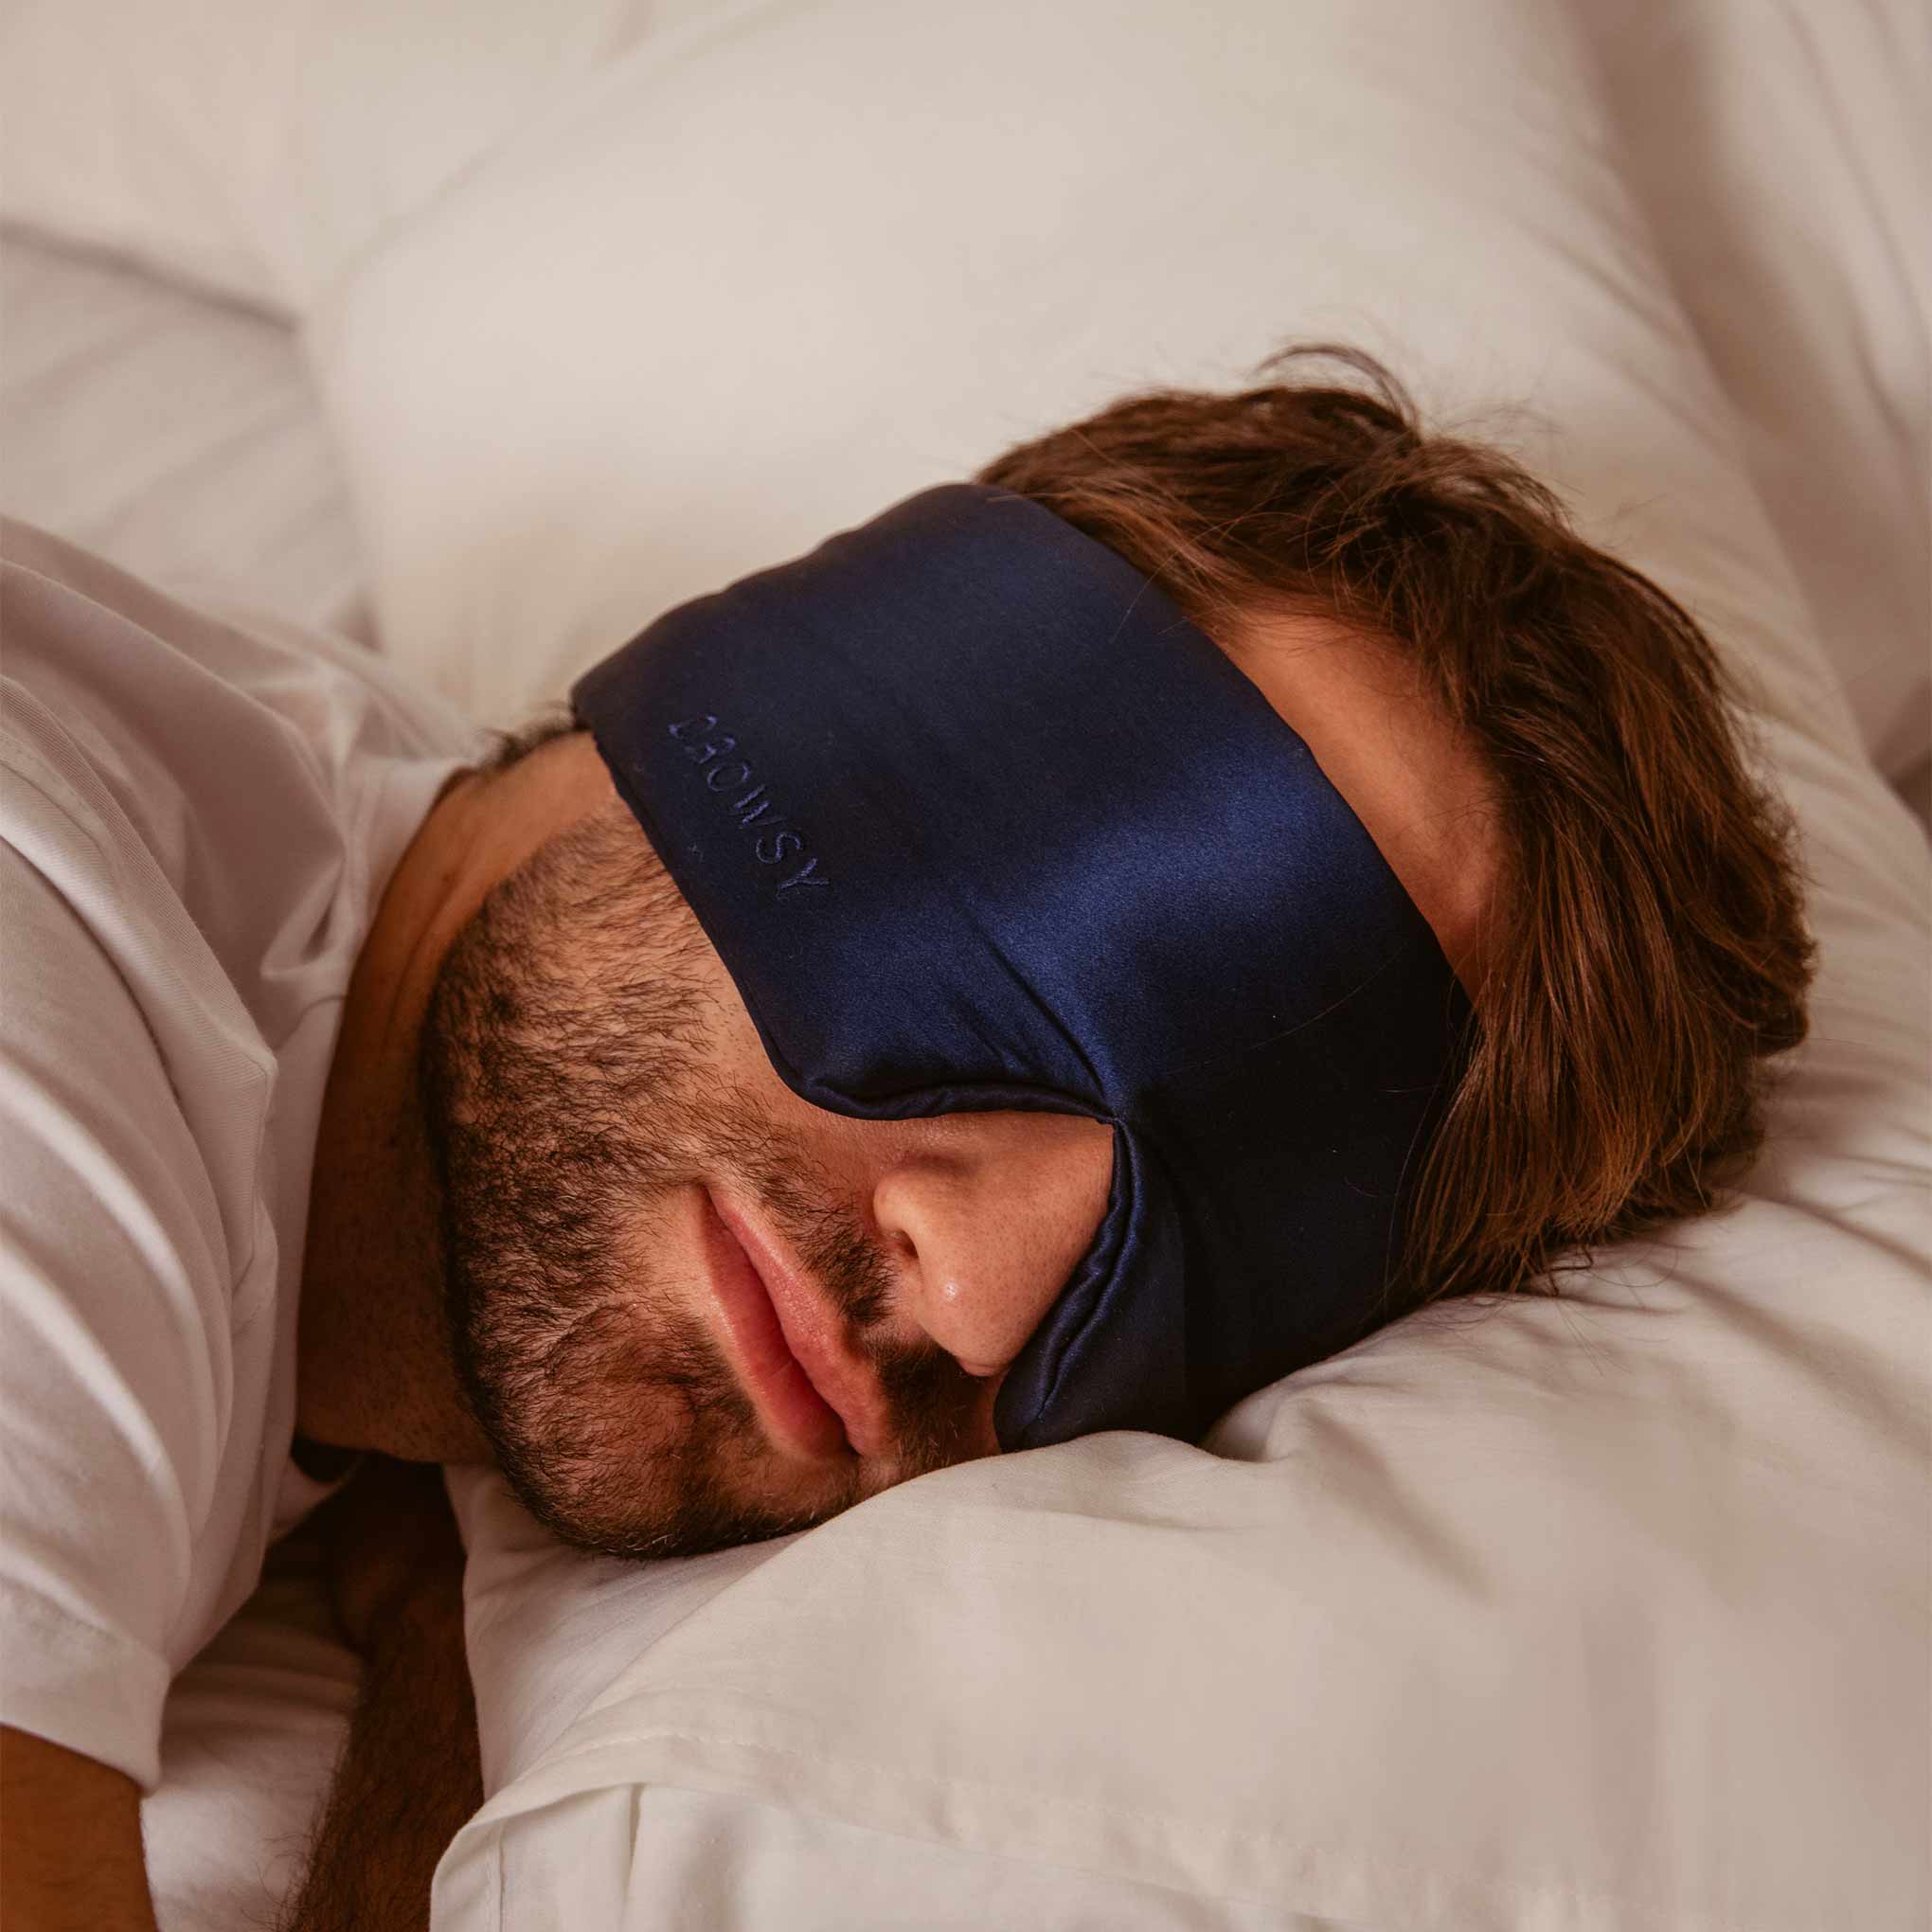 Man sleeping on white bedsheets with a blue Drowsy silk sleep mask covering his eyes